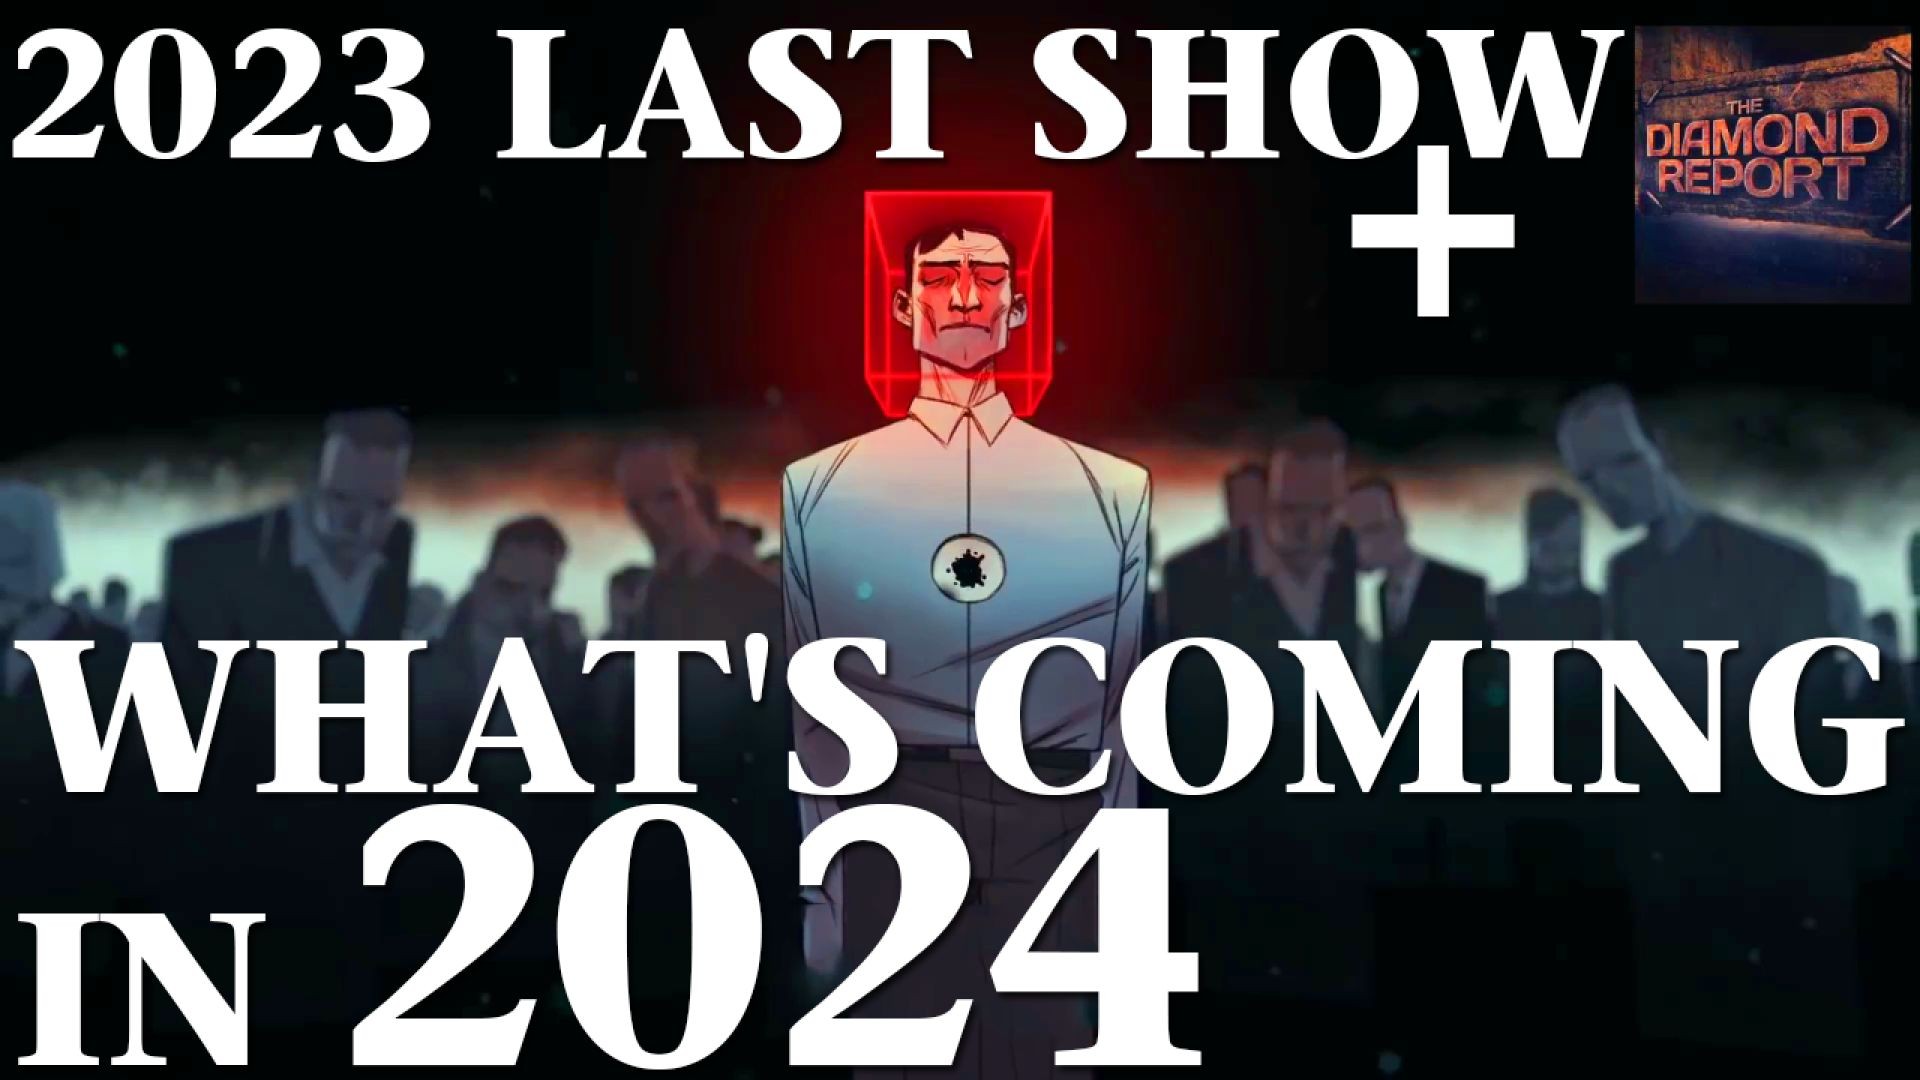 2023 Last Show + What's Coming In 2024 - The Diamond Report LIVE with Doug Diamond - 12/24/23